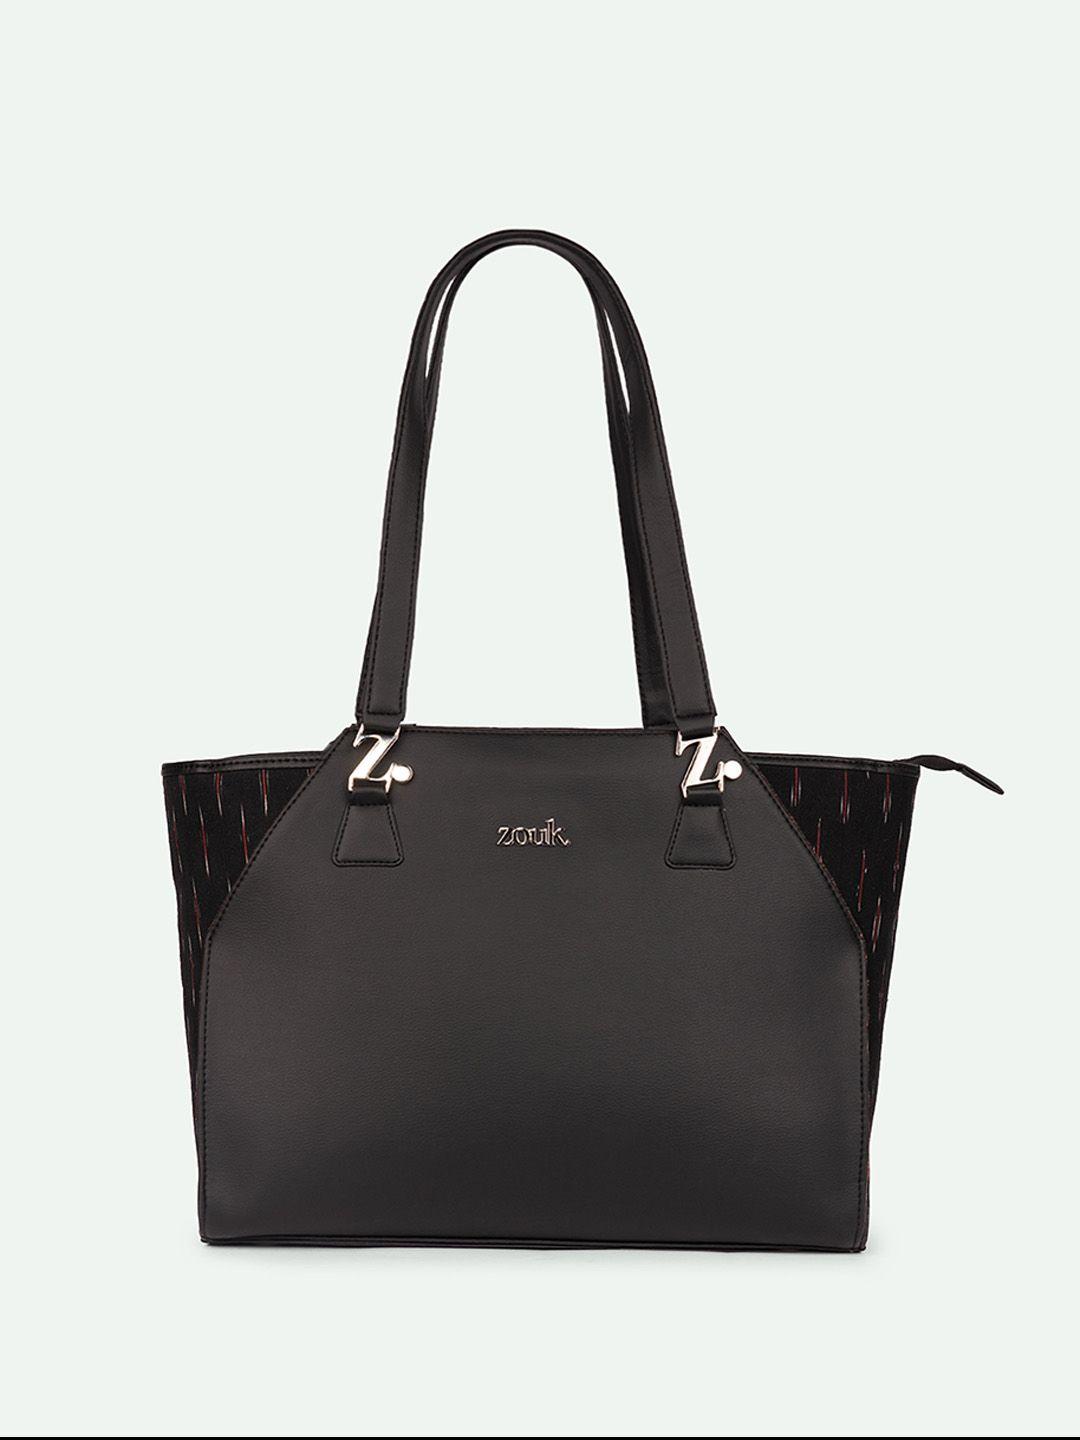 zouk oversized structured tote bag with applique